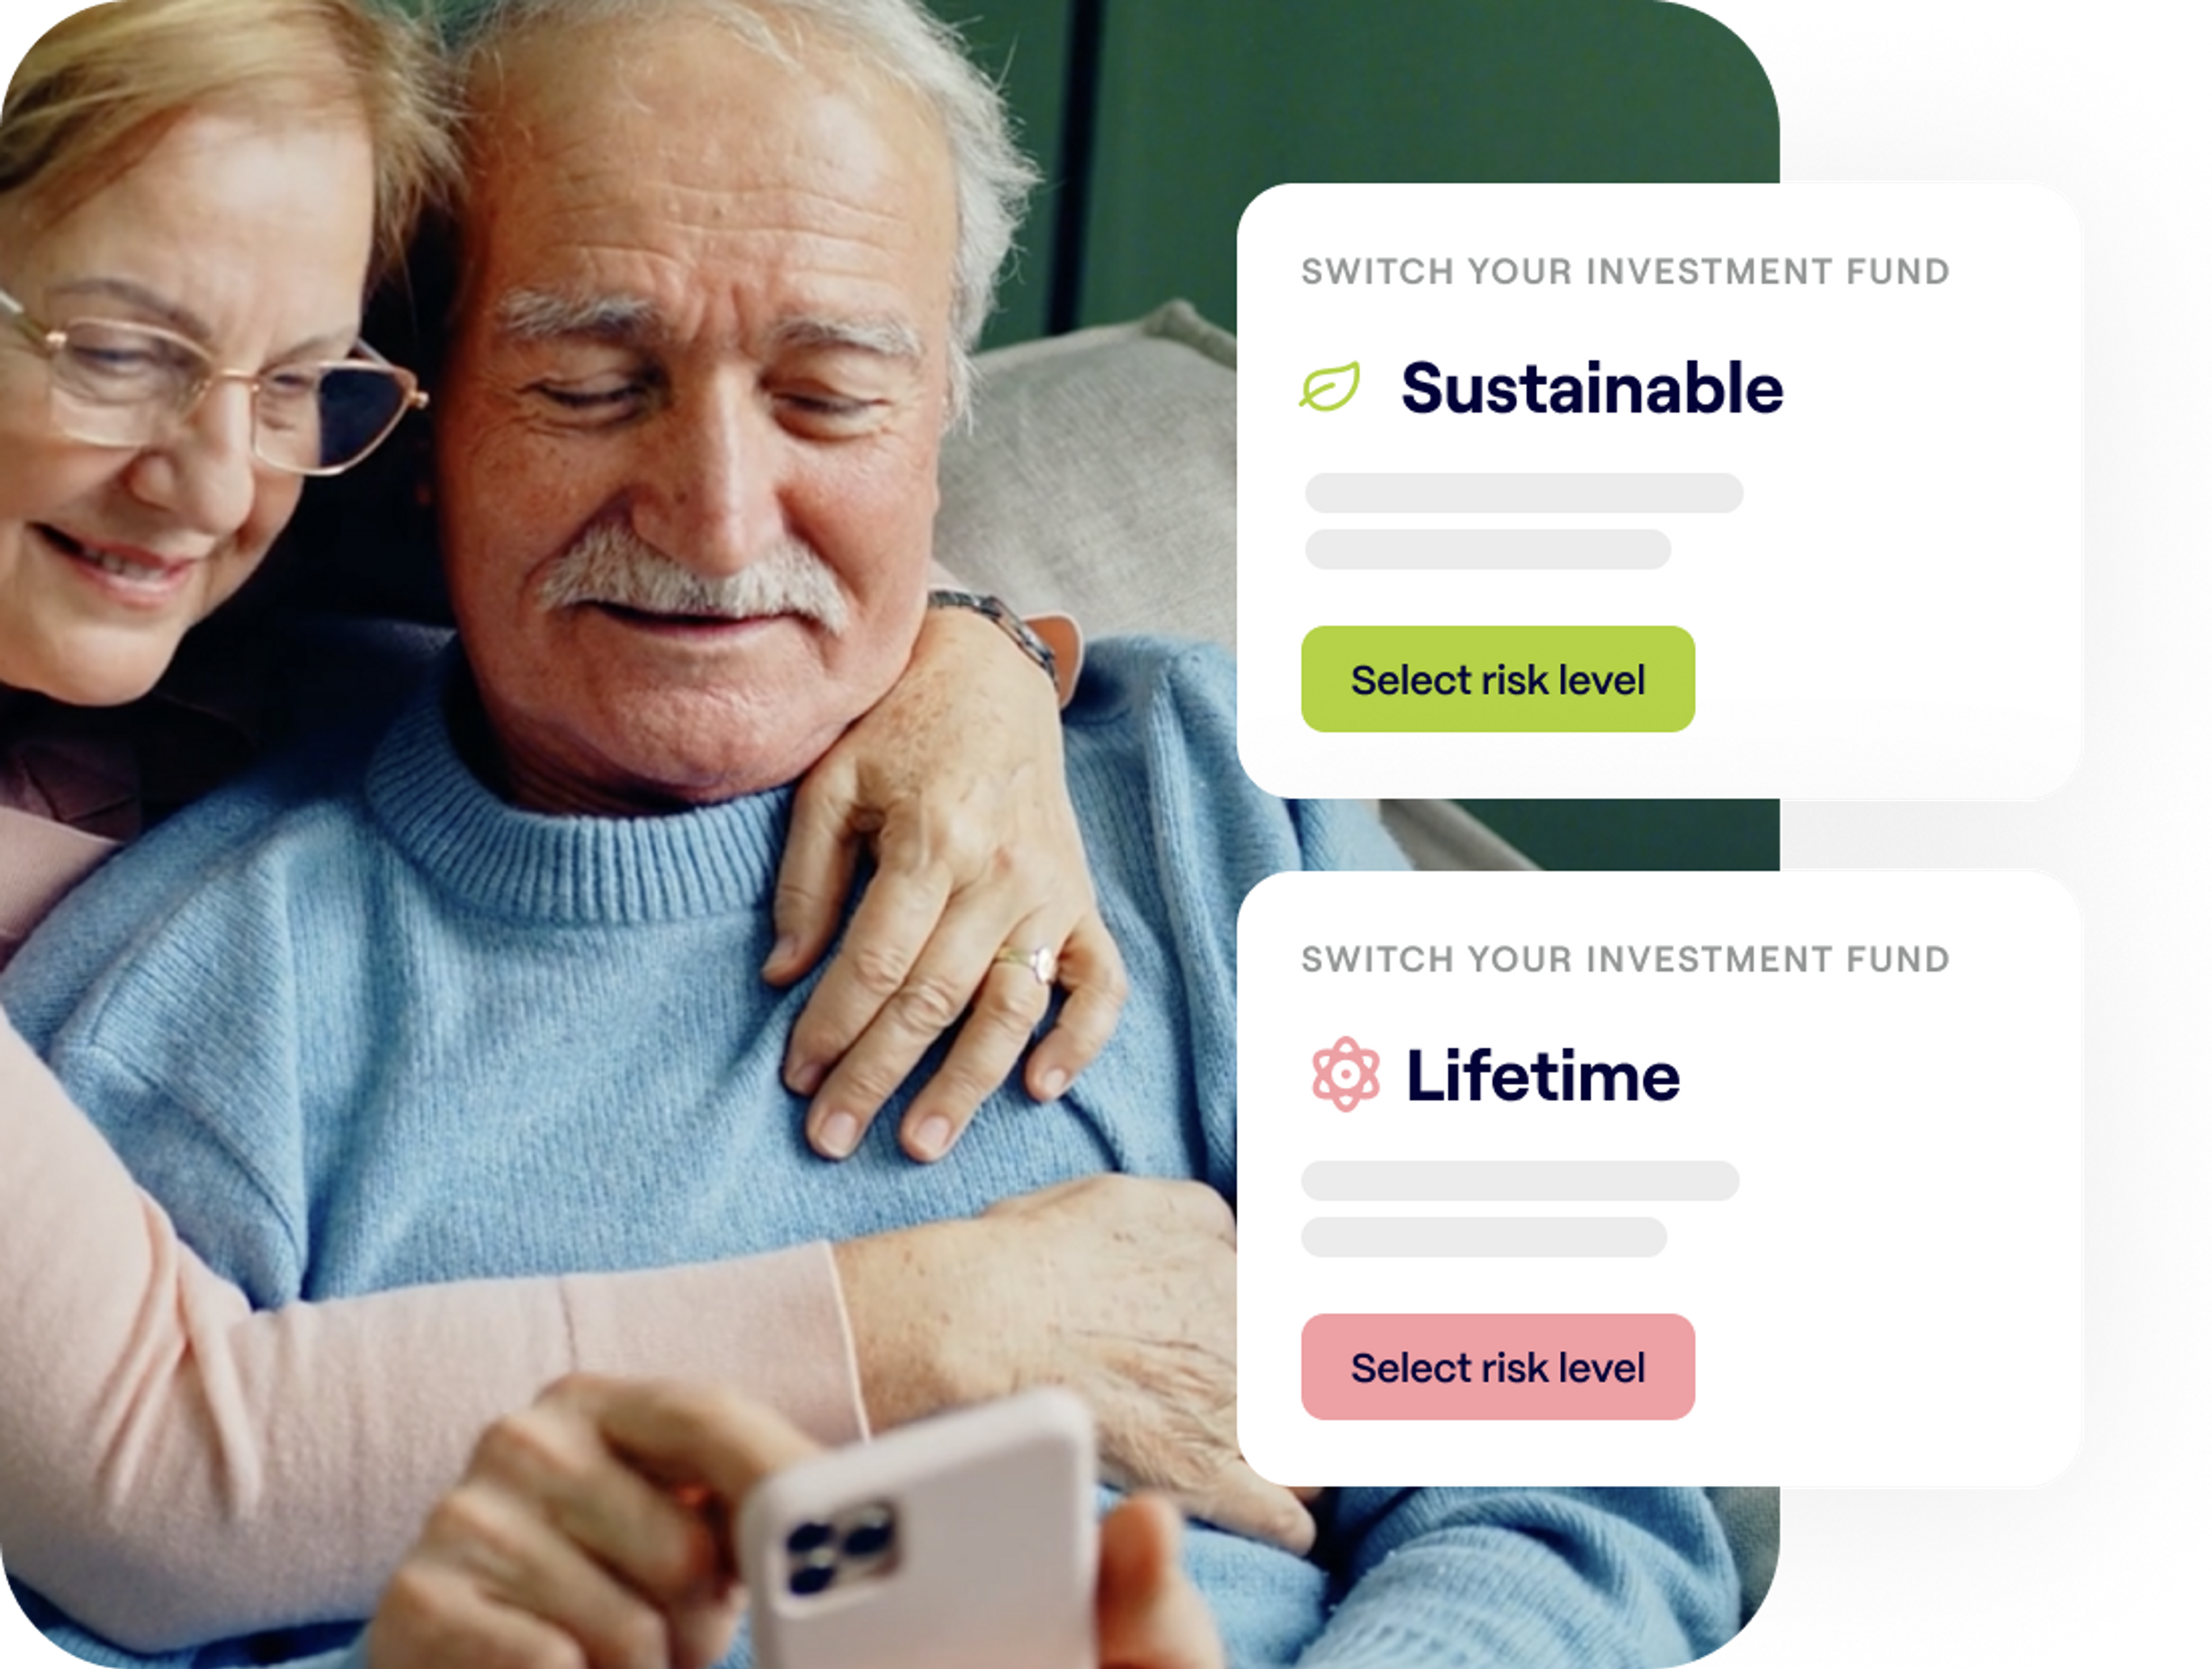 A photo of a happy older couple looking at a phone and excerpts of the Penfold pension app showing Sustainable and Lifetime investment fund screens